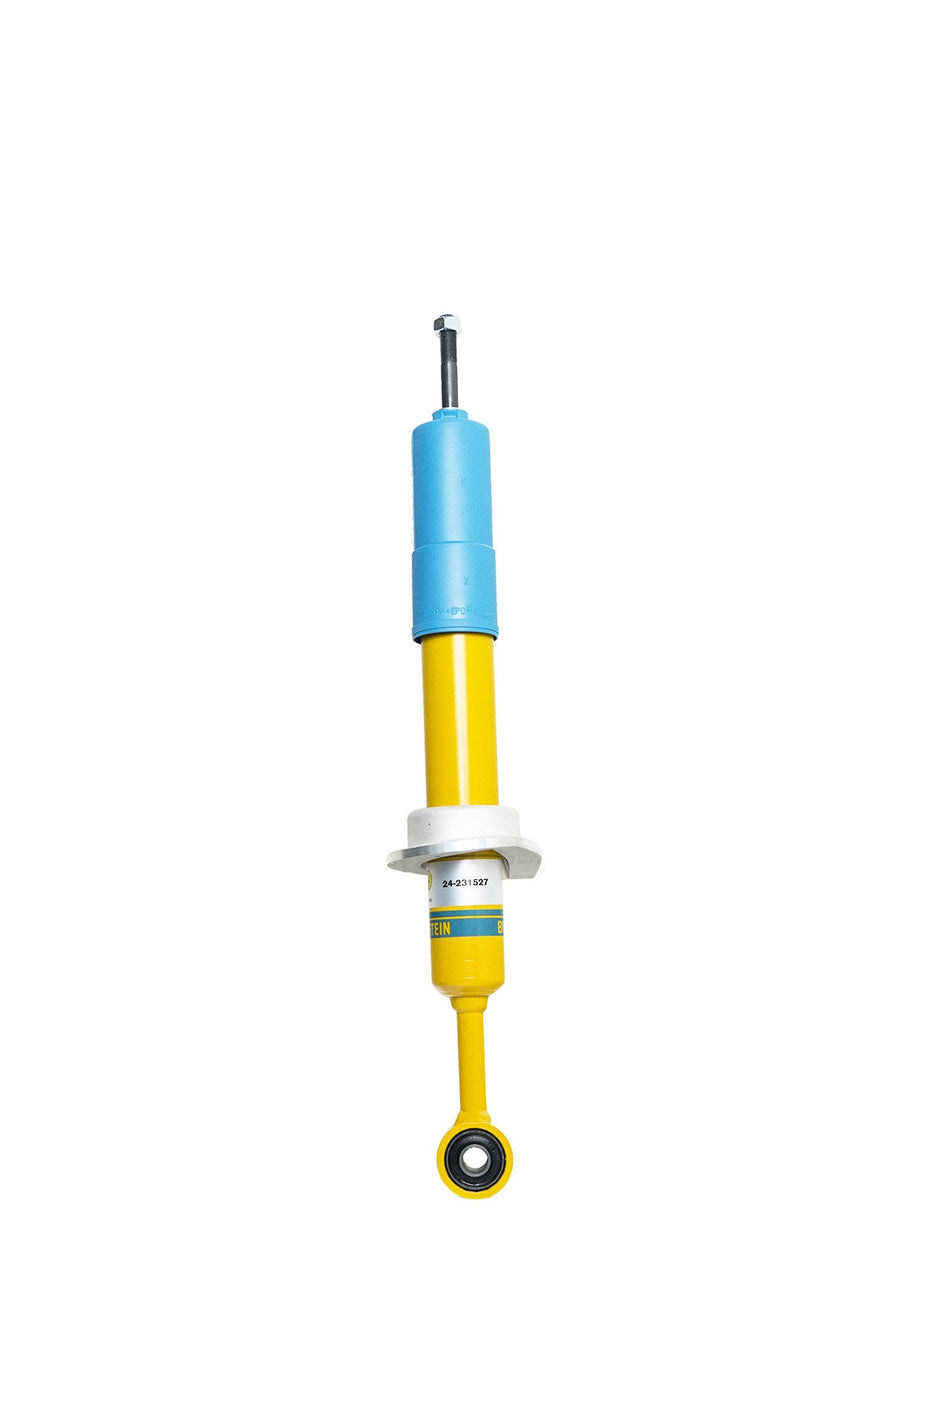 Bilstein Rear Shock for Mistubushi Pajero NM,NP,NS,NT,NW,NX (2000-Current)